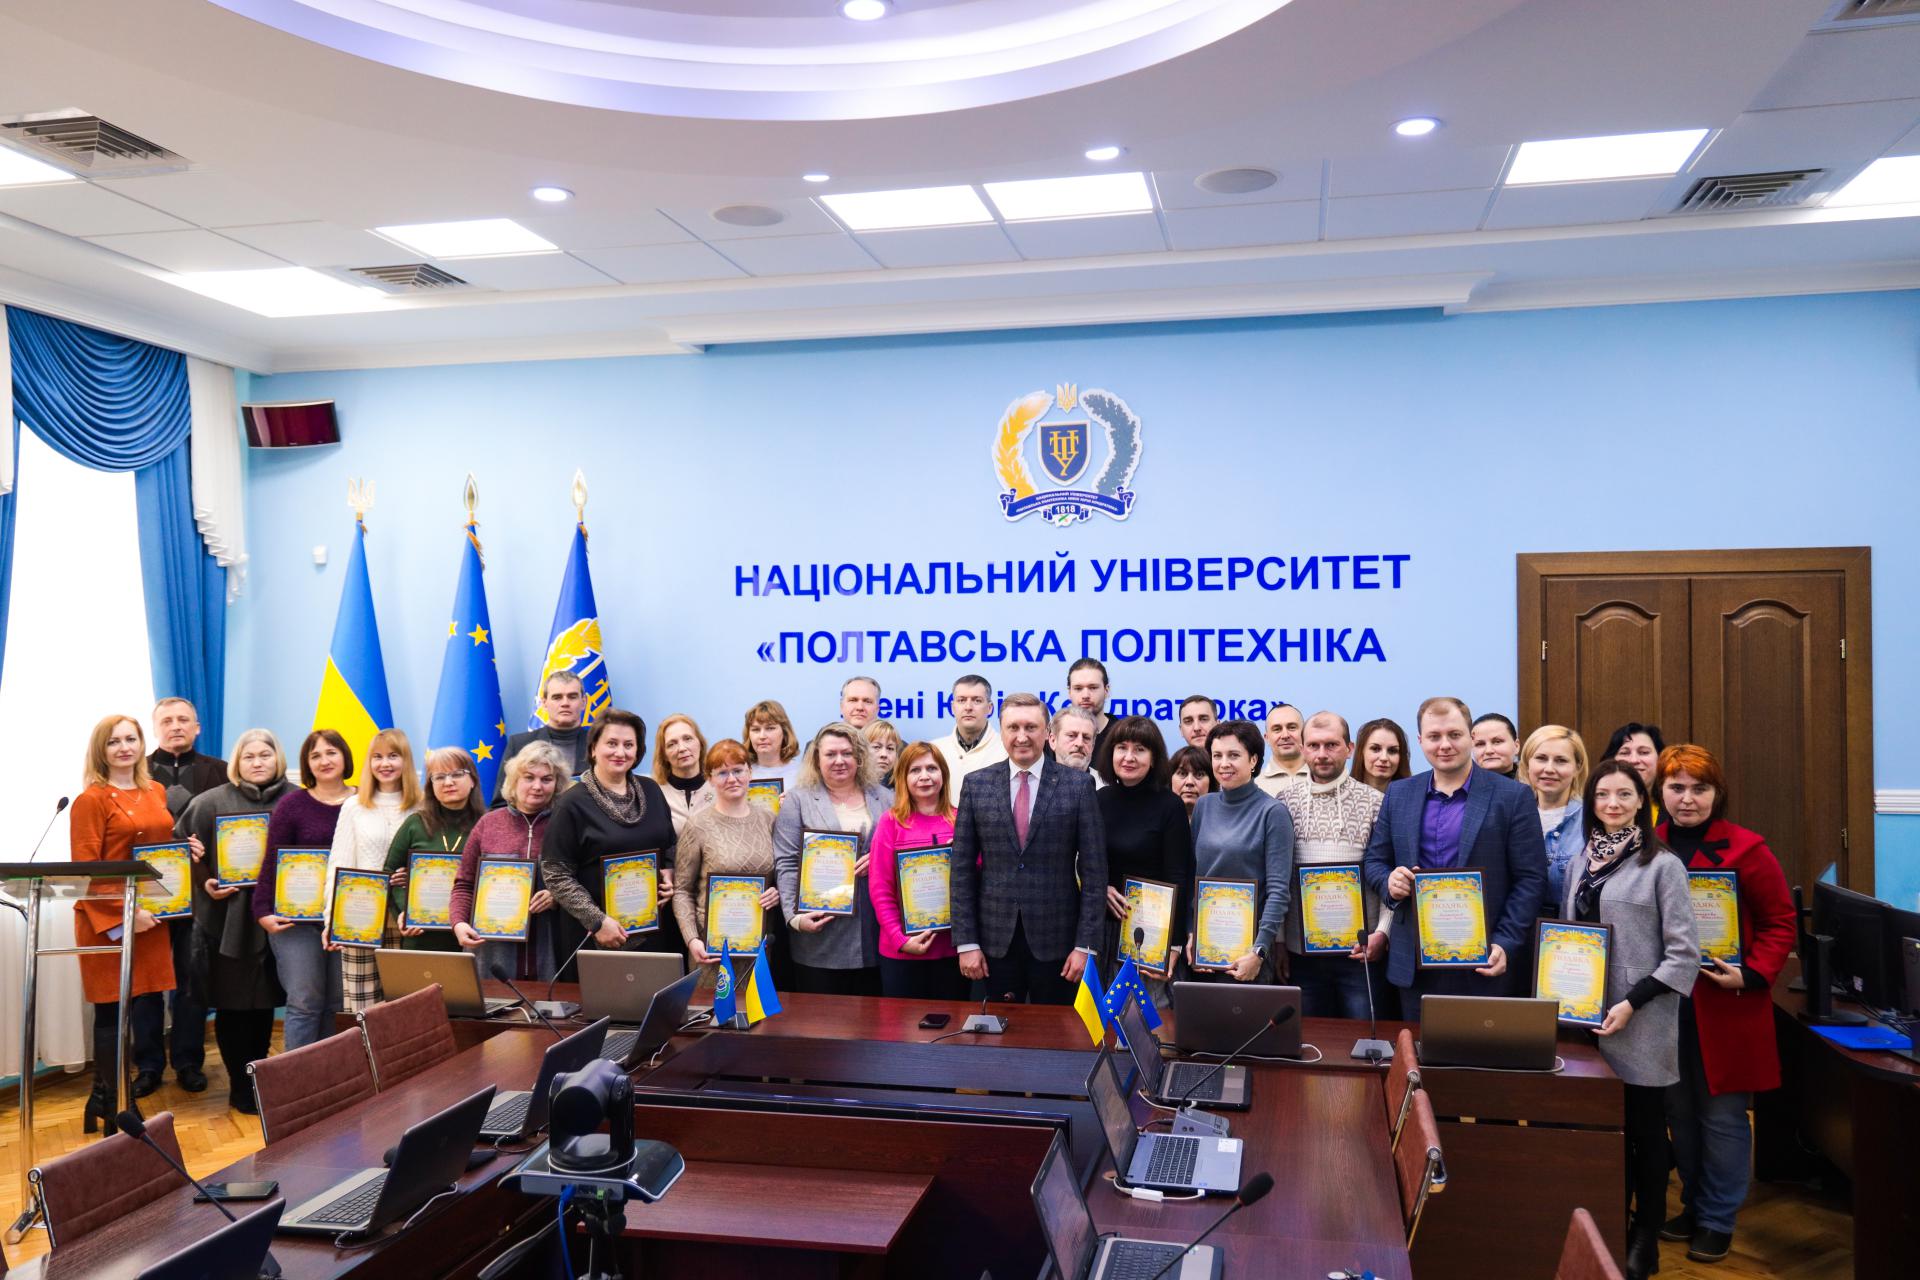 34 Polytechnic scientists are awarded for their work with the gifted student youth of the Poltava region 